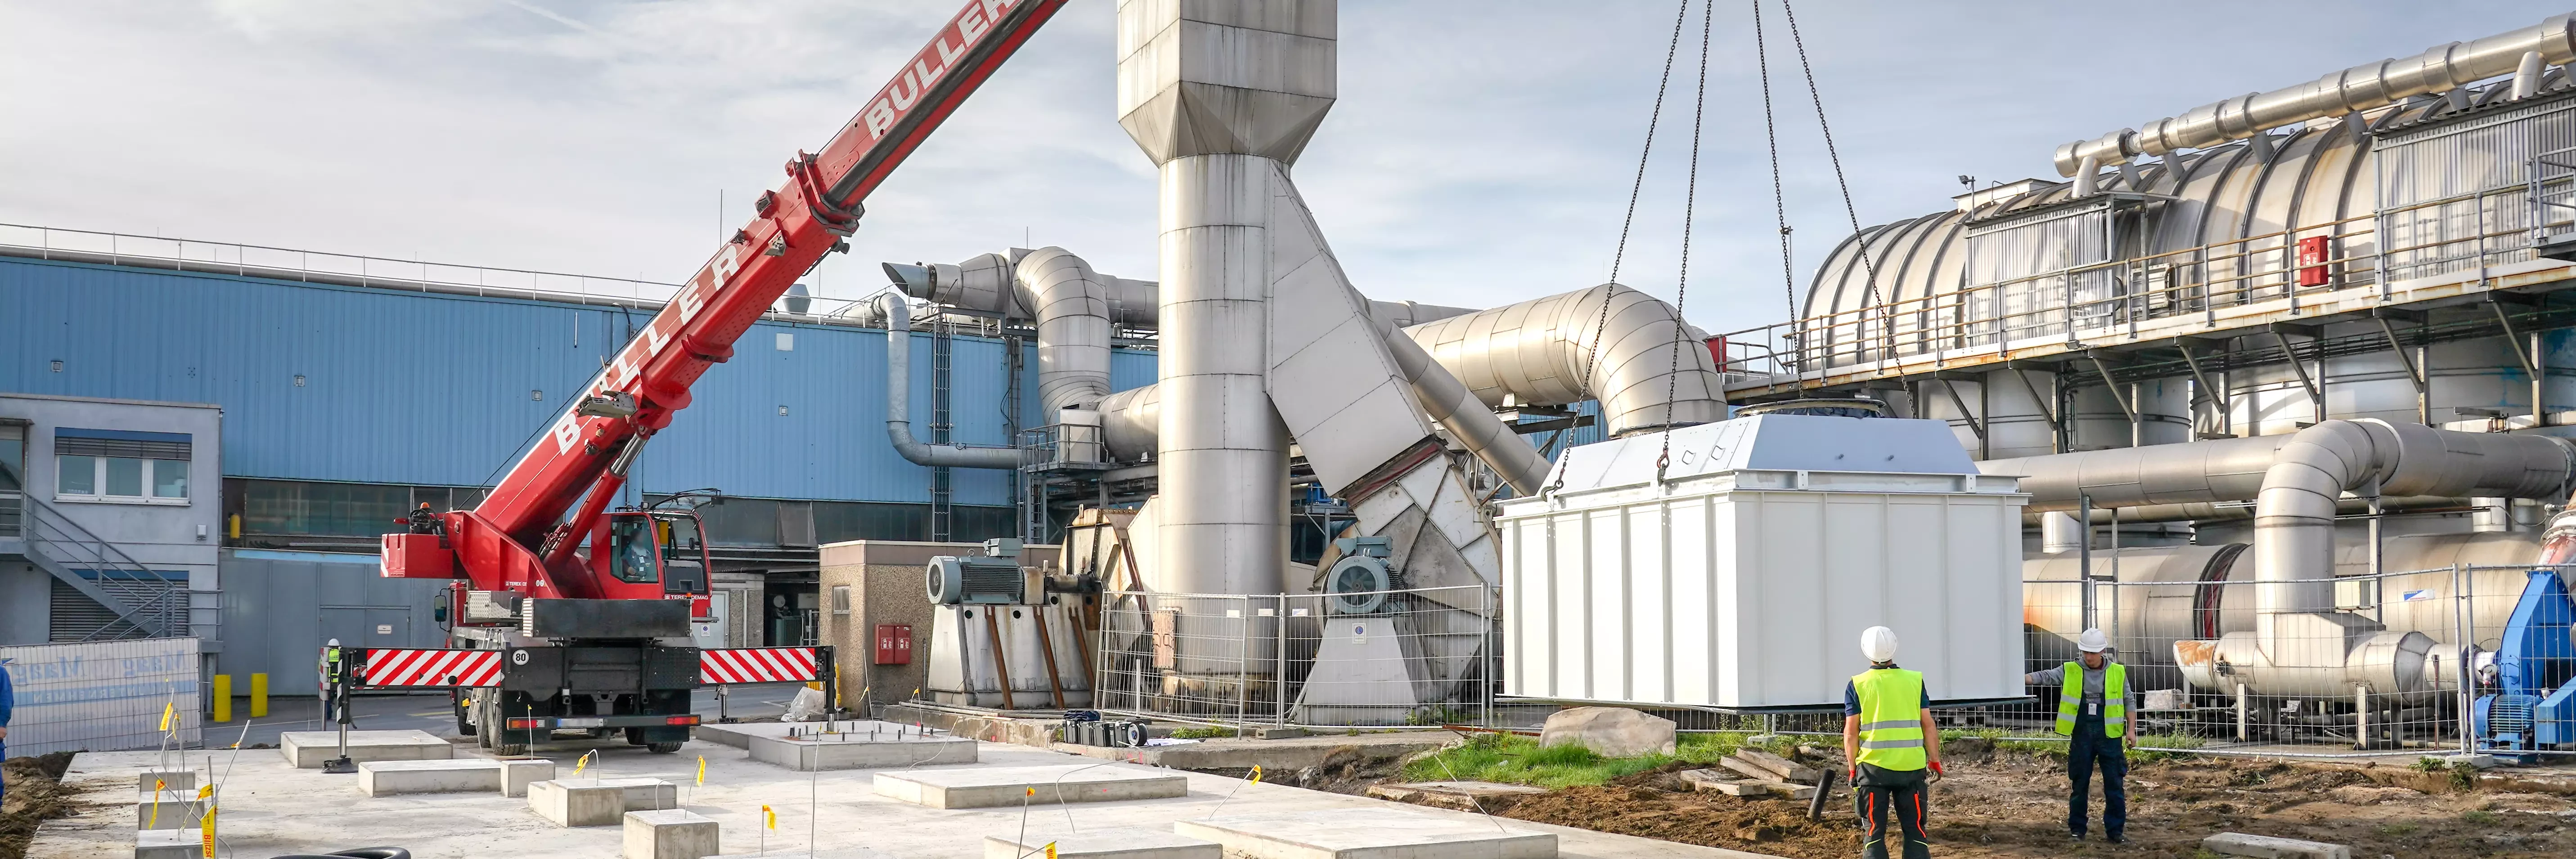 Oxidizer relocation and installation – relocation planning and management, ductwork design